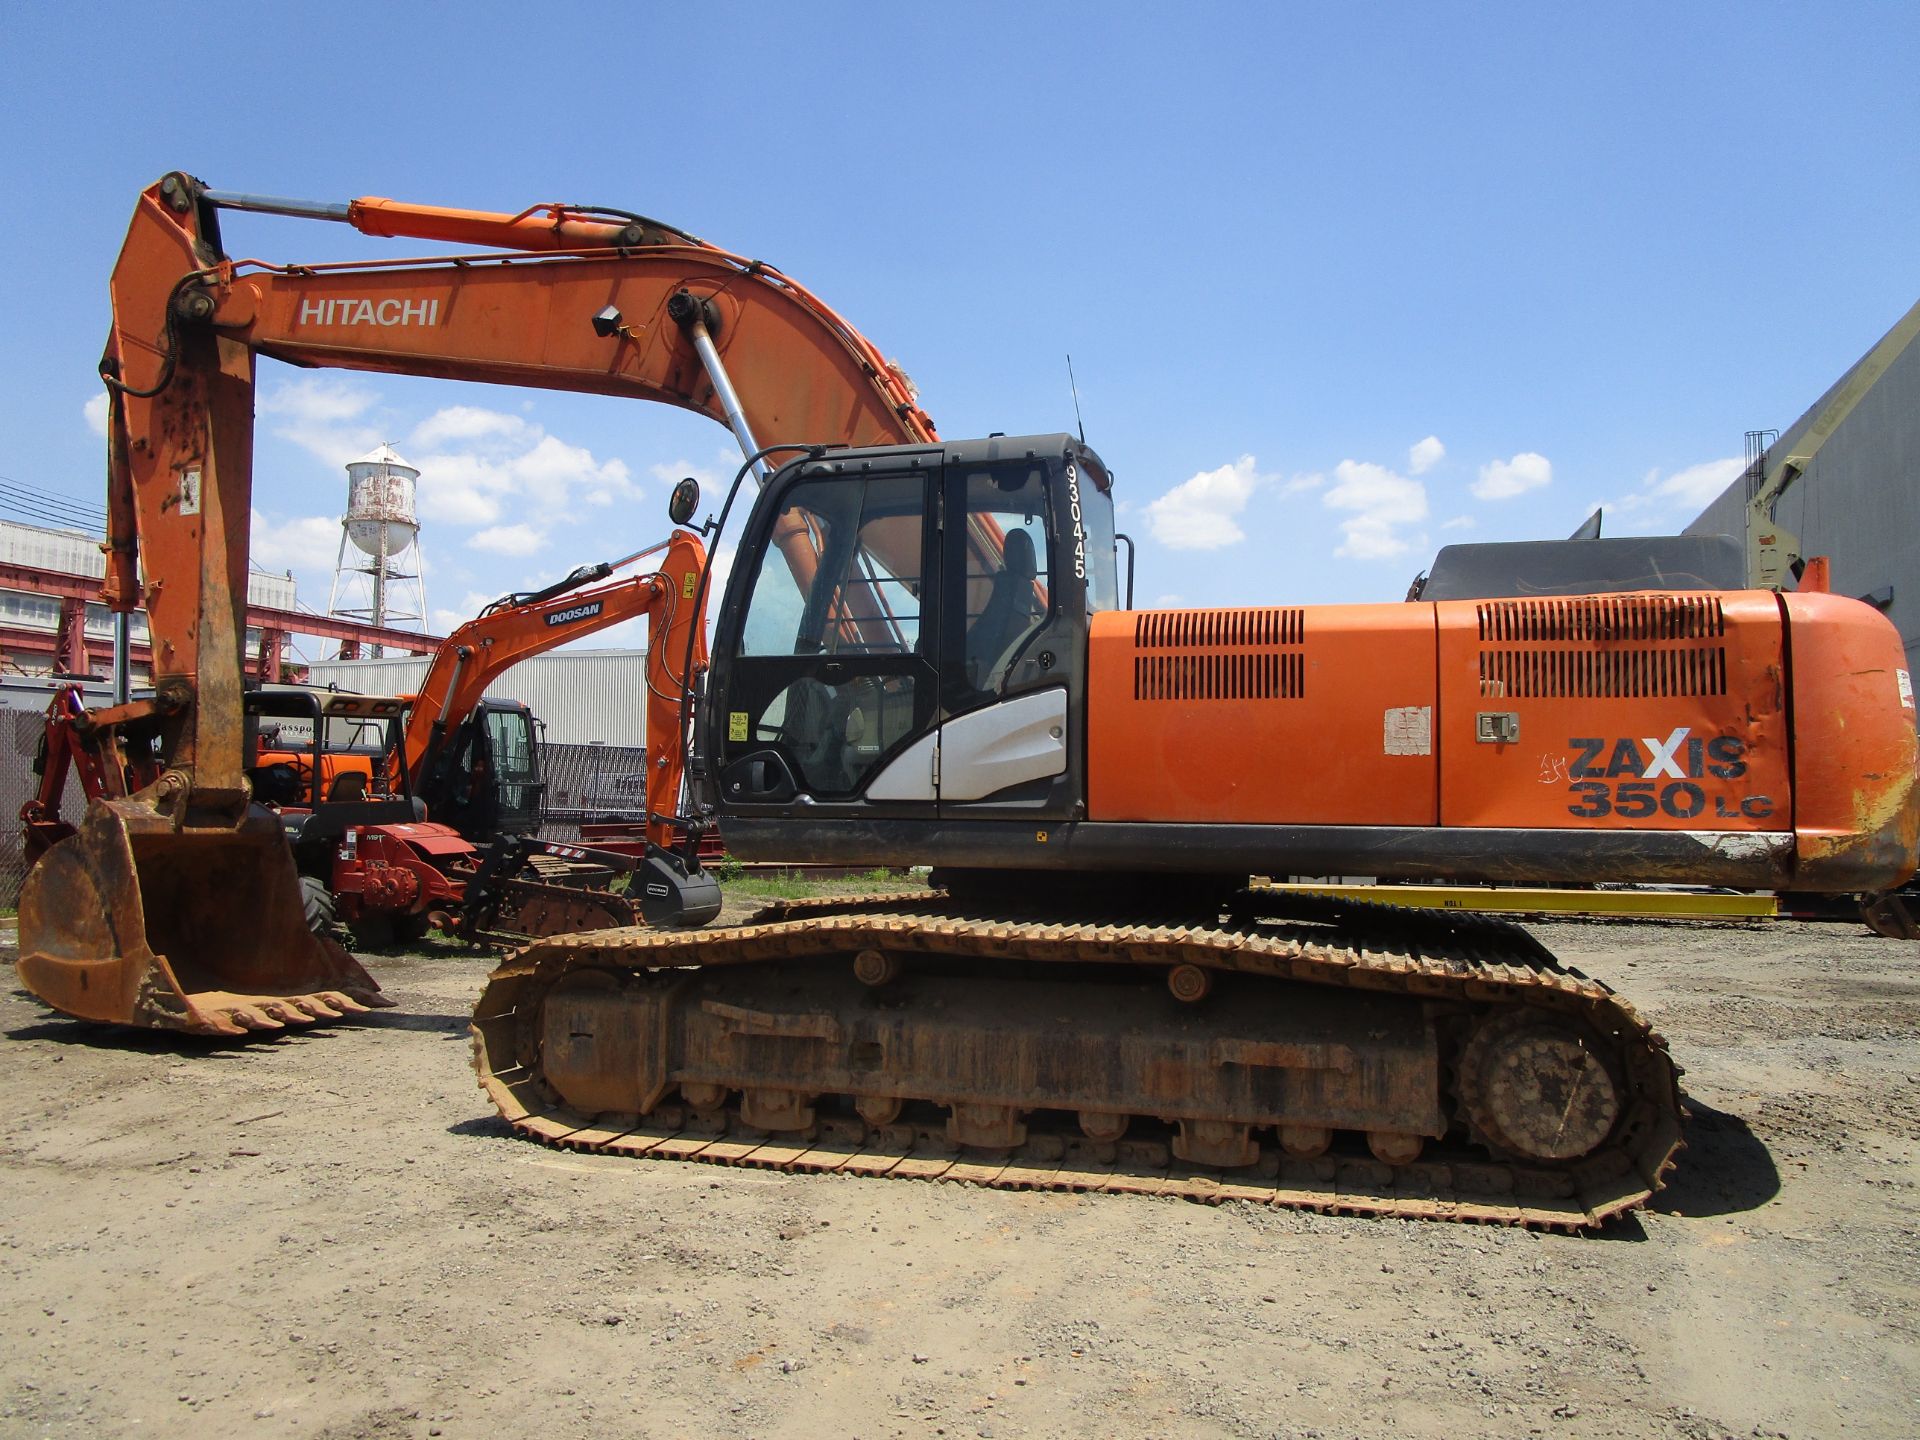 2013 Hitachi ZX350 LC-5N Excavator - Located in Lester, PA - Image 4 of 15